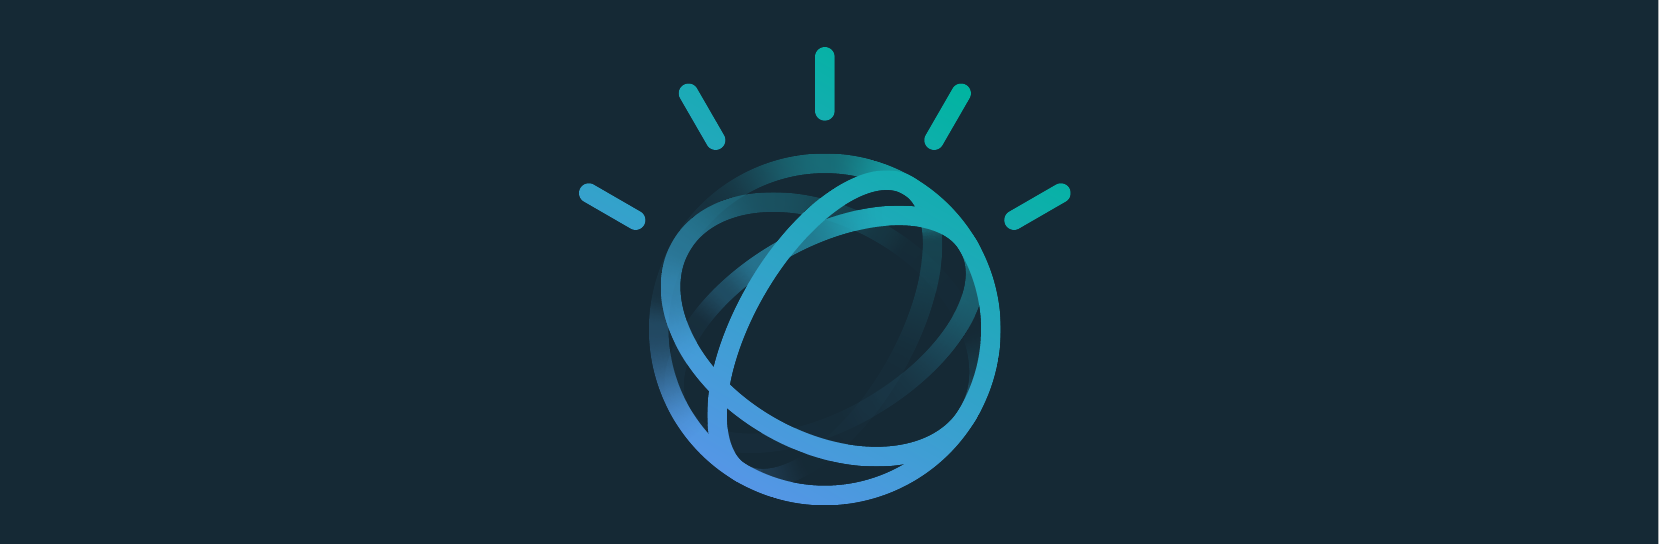 Navigating IBM’s Data and AI Products